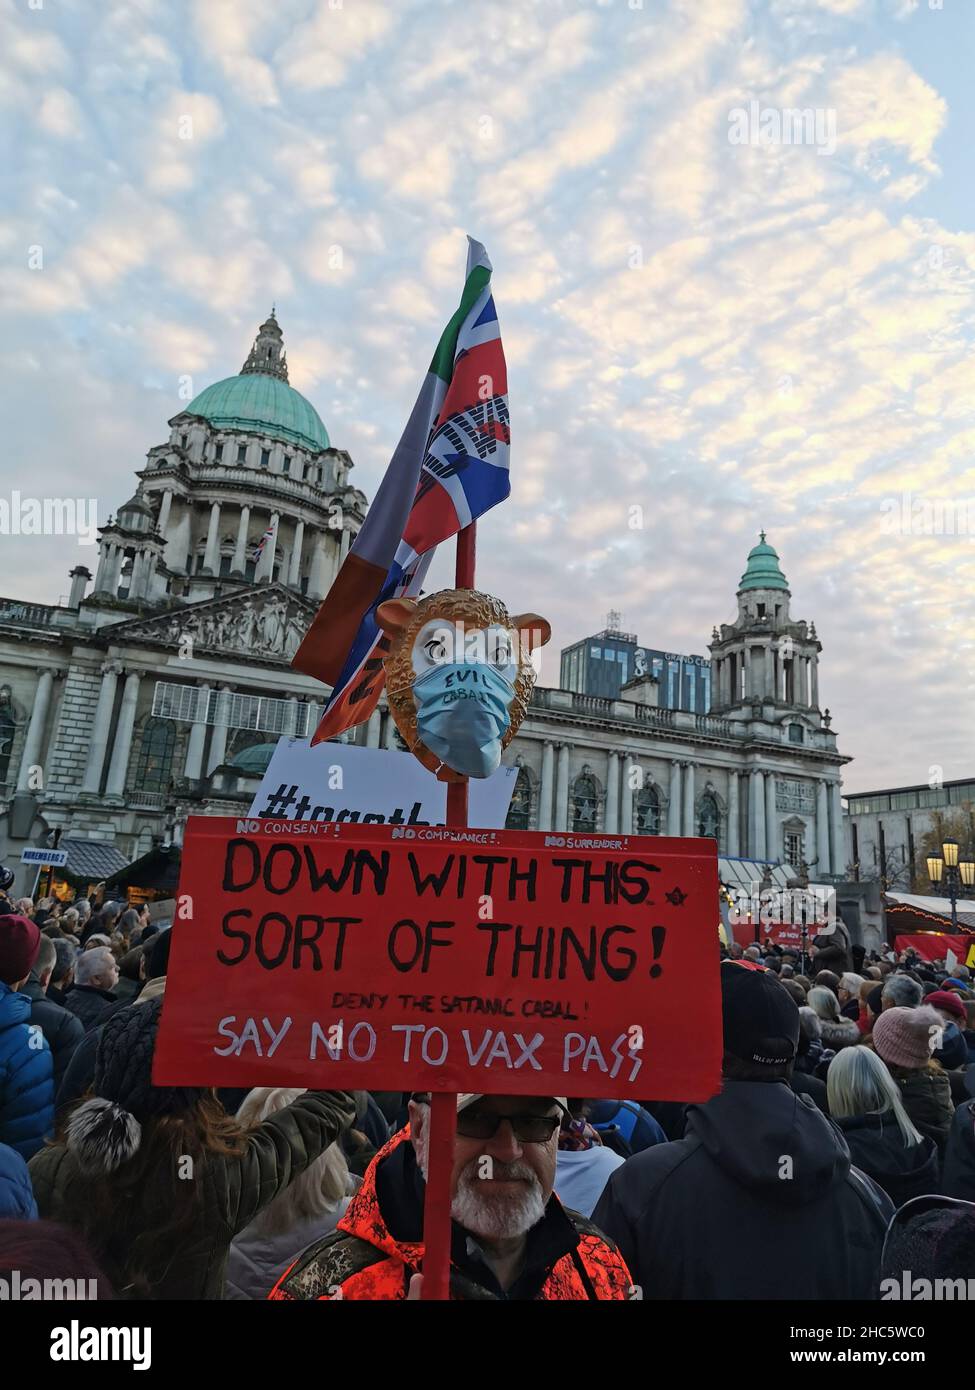 Anti-vaccination protesters in Belfast, Northern Ireland, UK Stock Photo